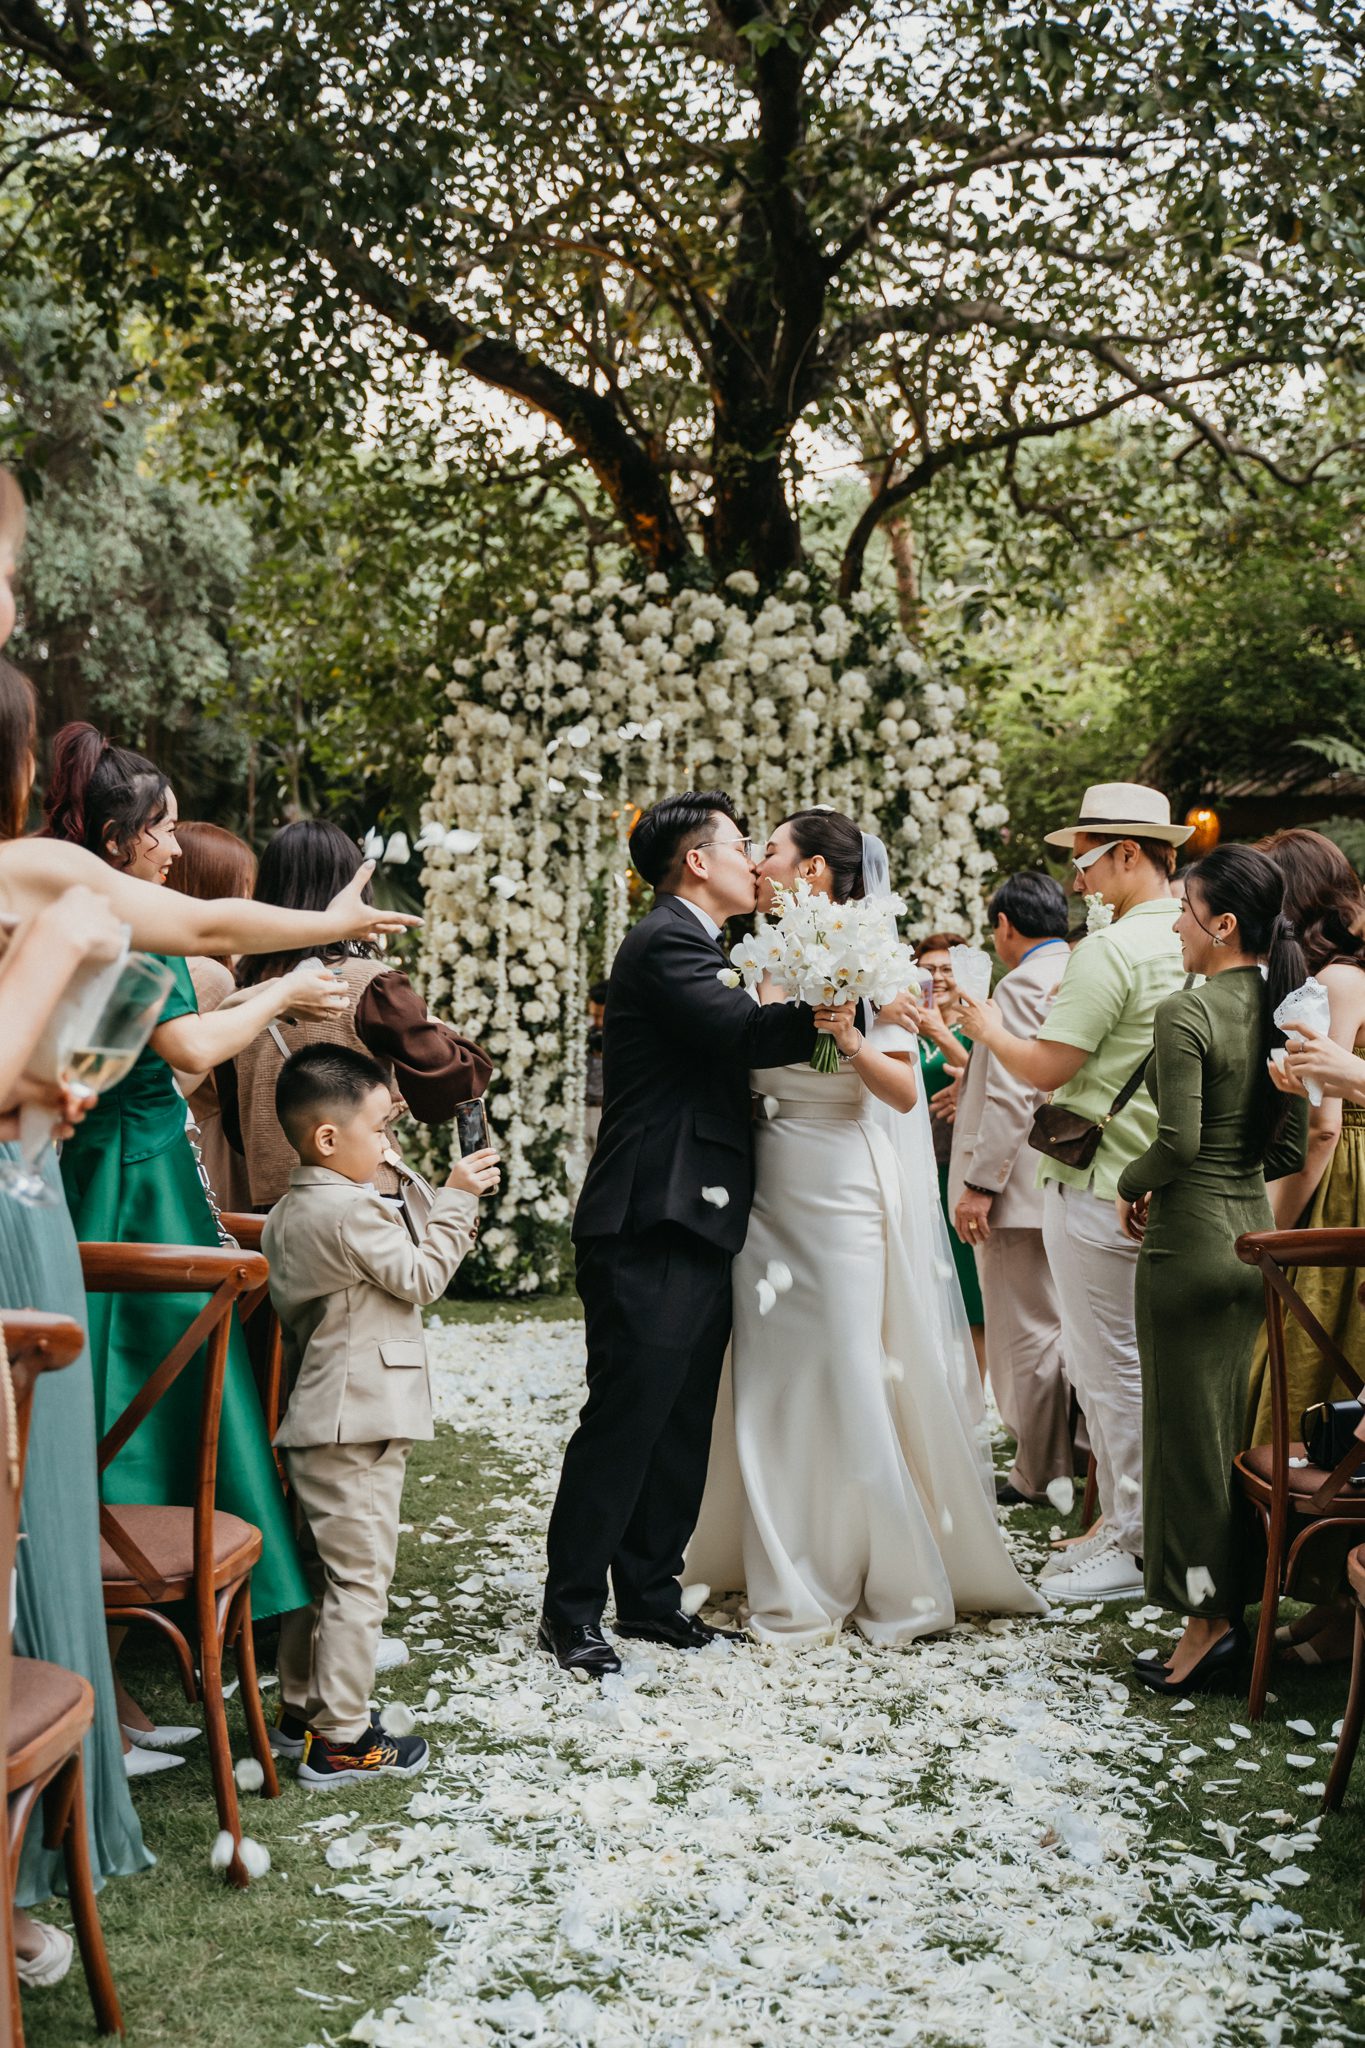 Saigon intimate wedding at An Lam Retreat 03584 - The Planners